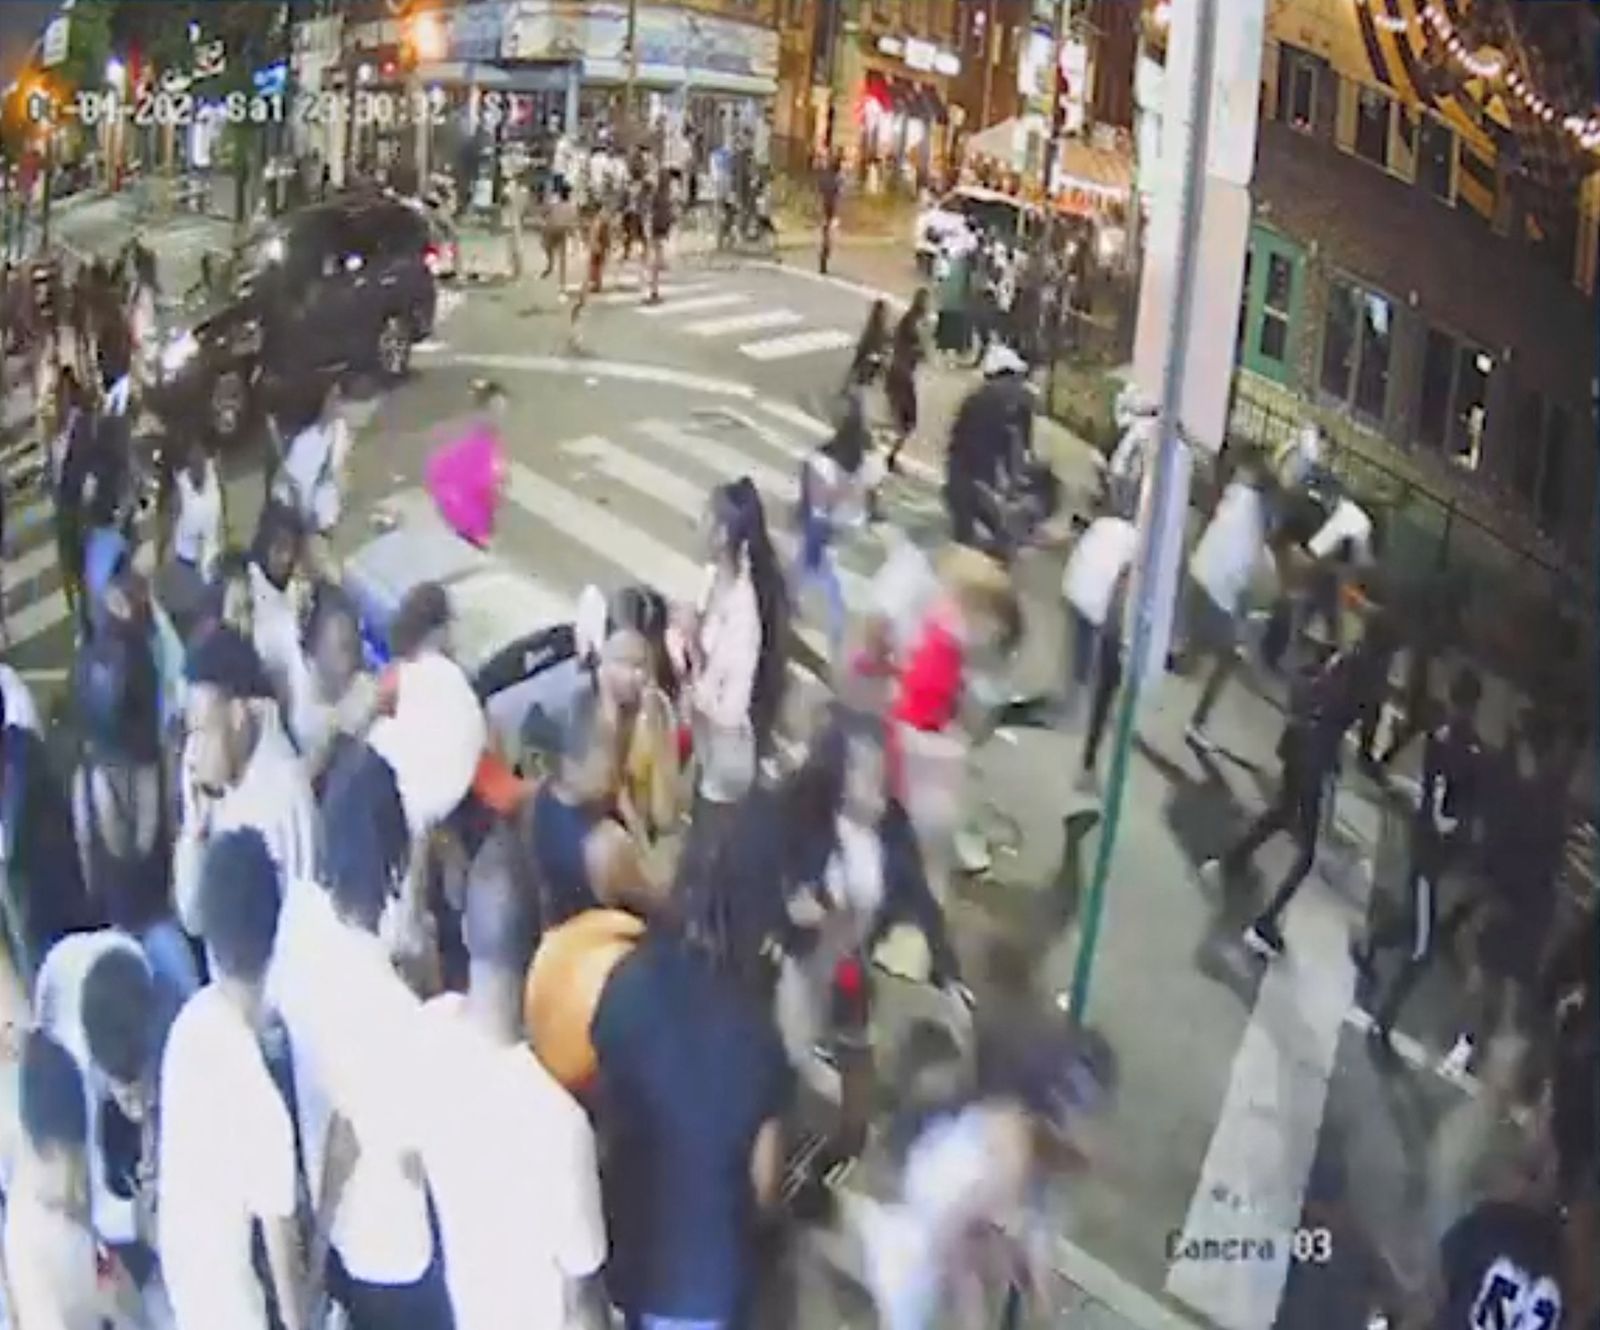 A screen grab from a surveillance video from the shooting shows people on a crowded street running in panic, presumably after gun shots were fired, in Philadelphia, Pennsylvania - via REUTERS